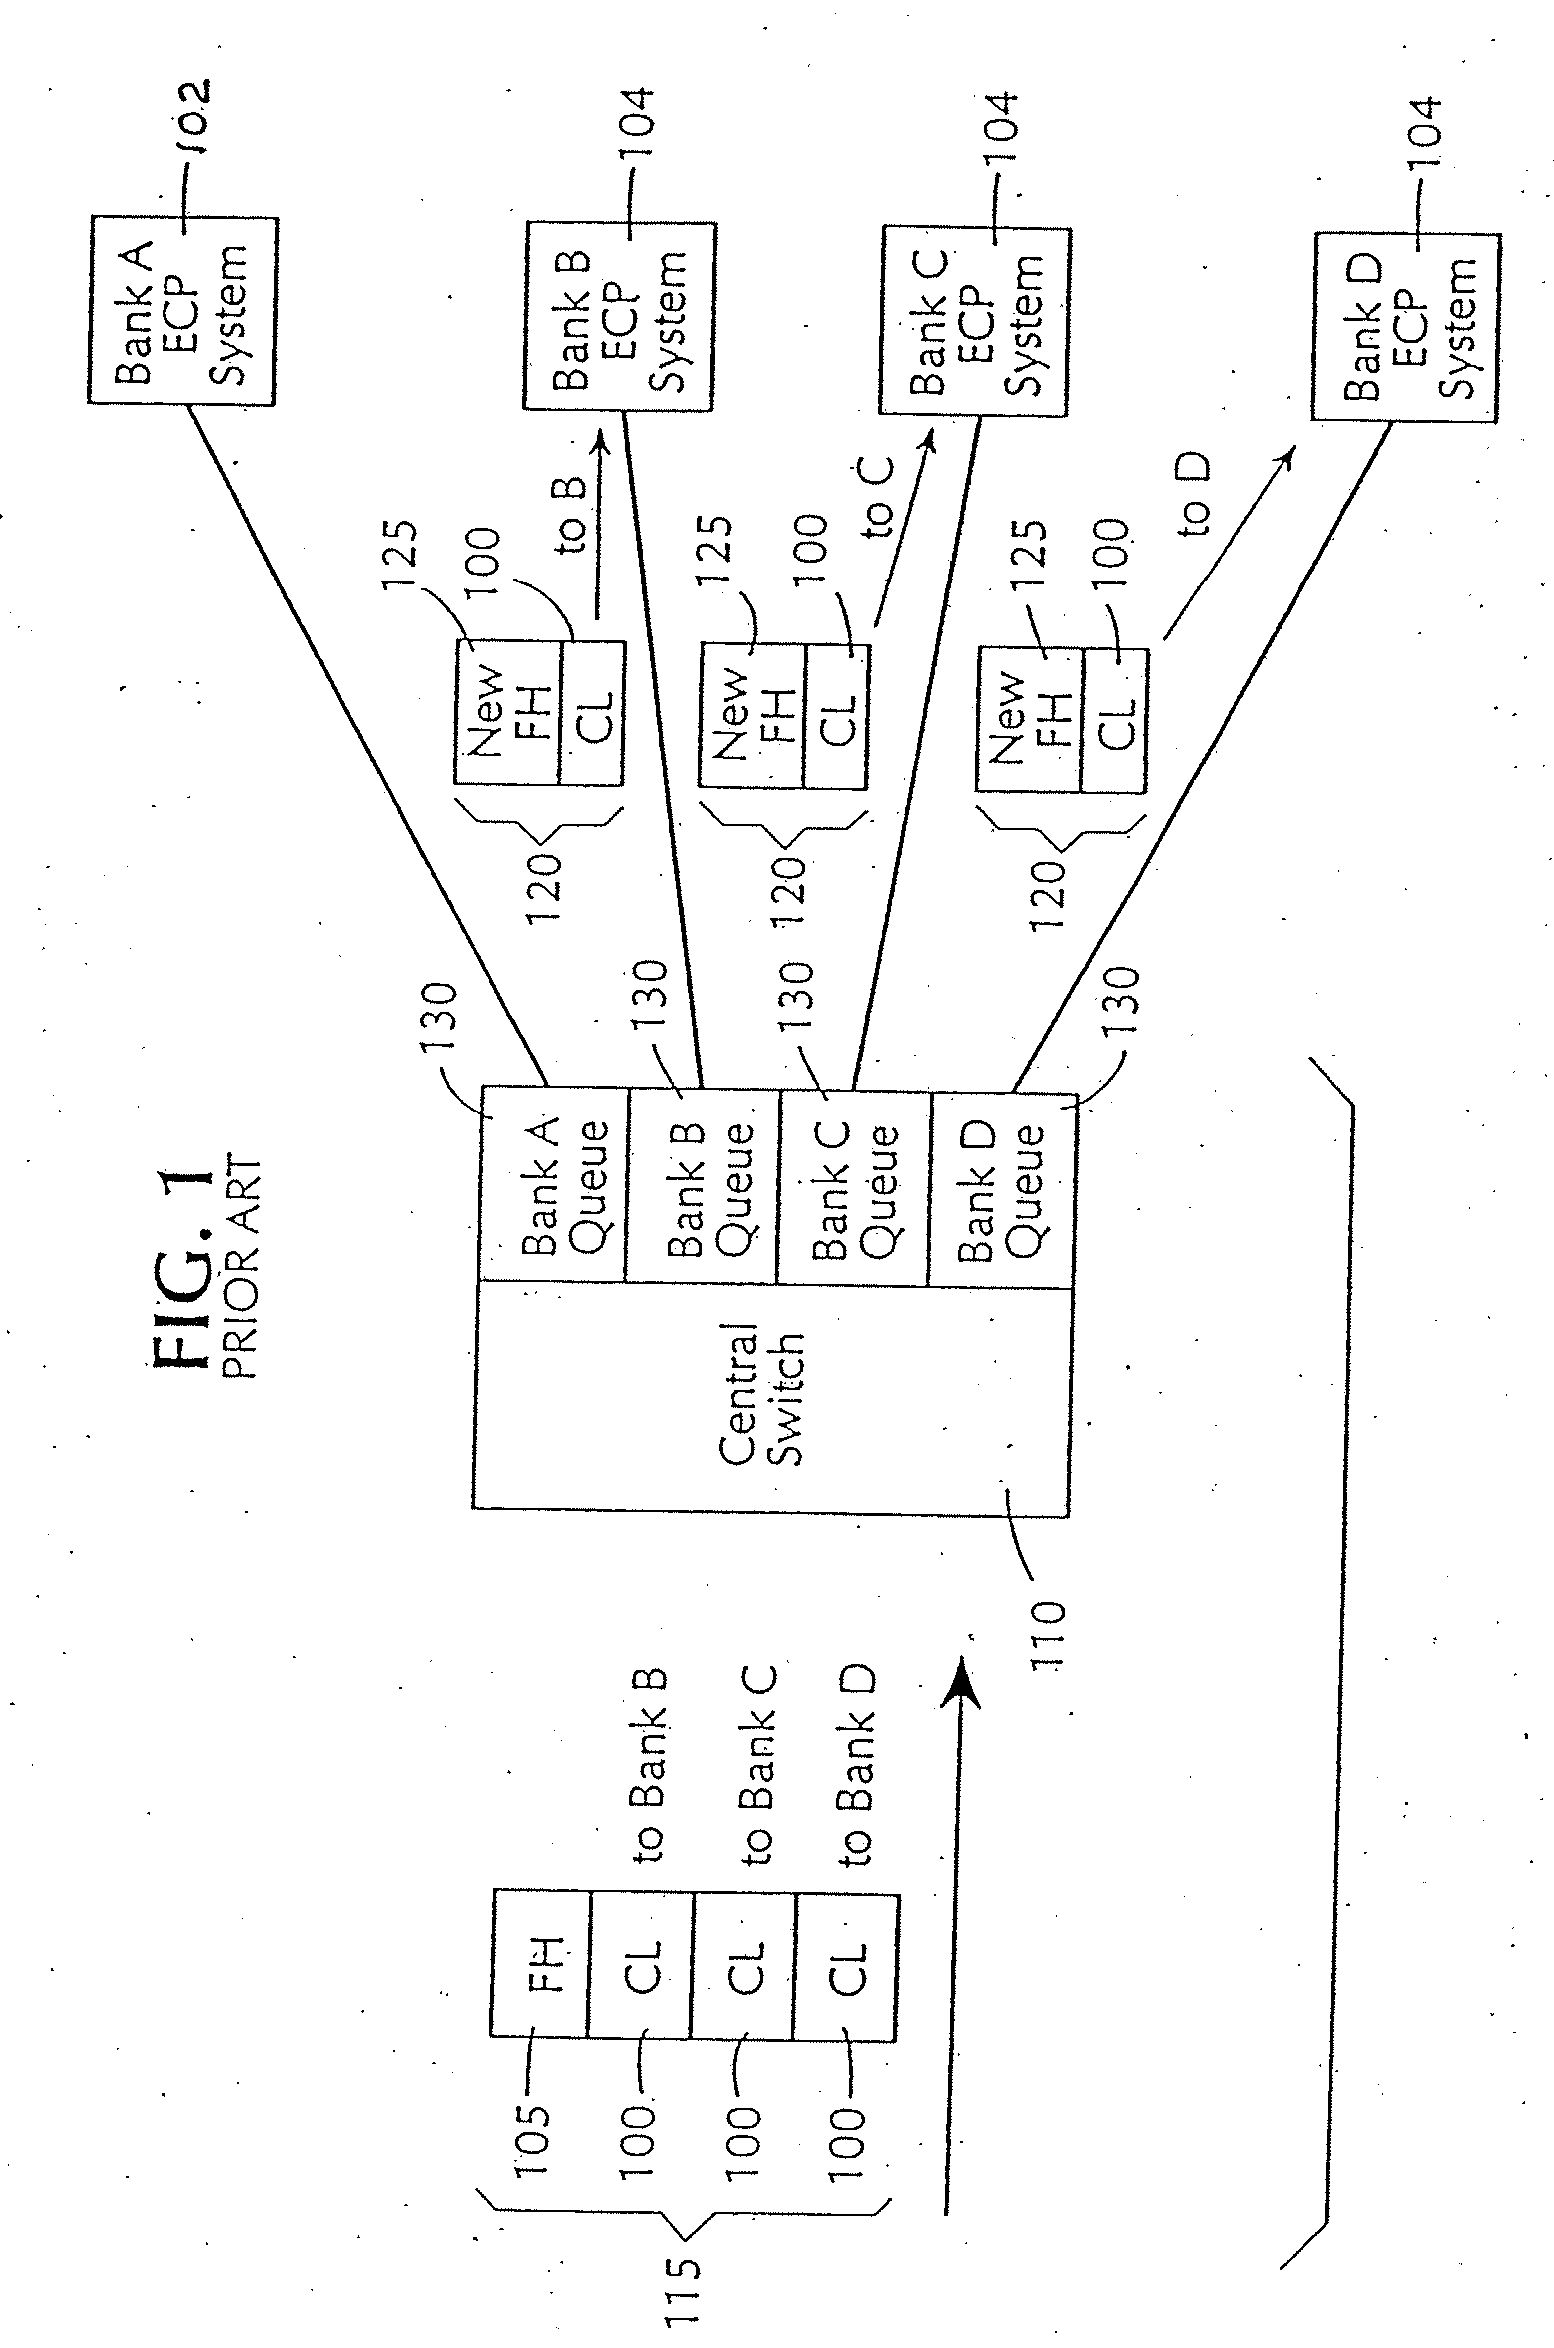 Method and system for electronic settlement of checks